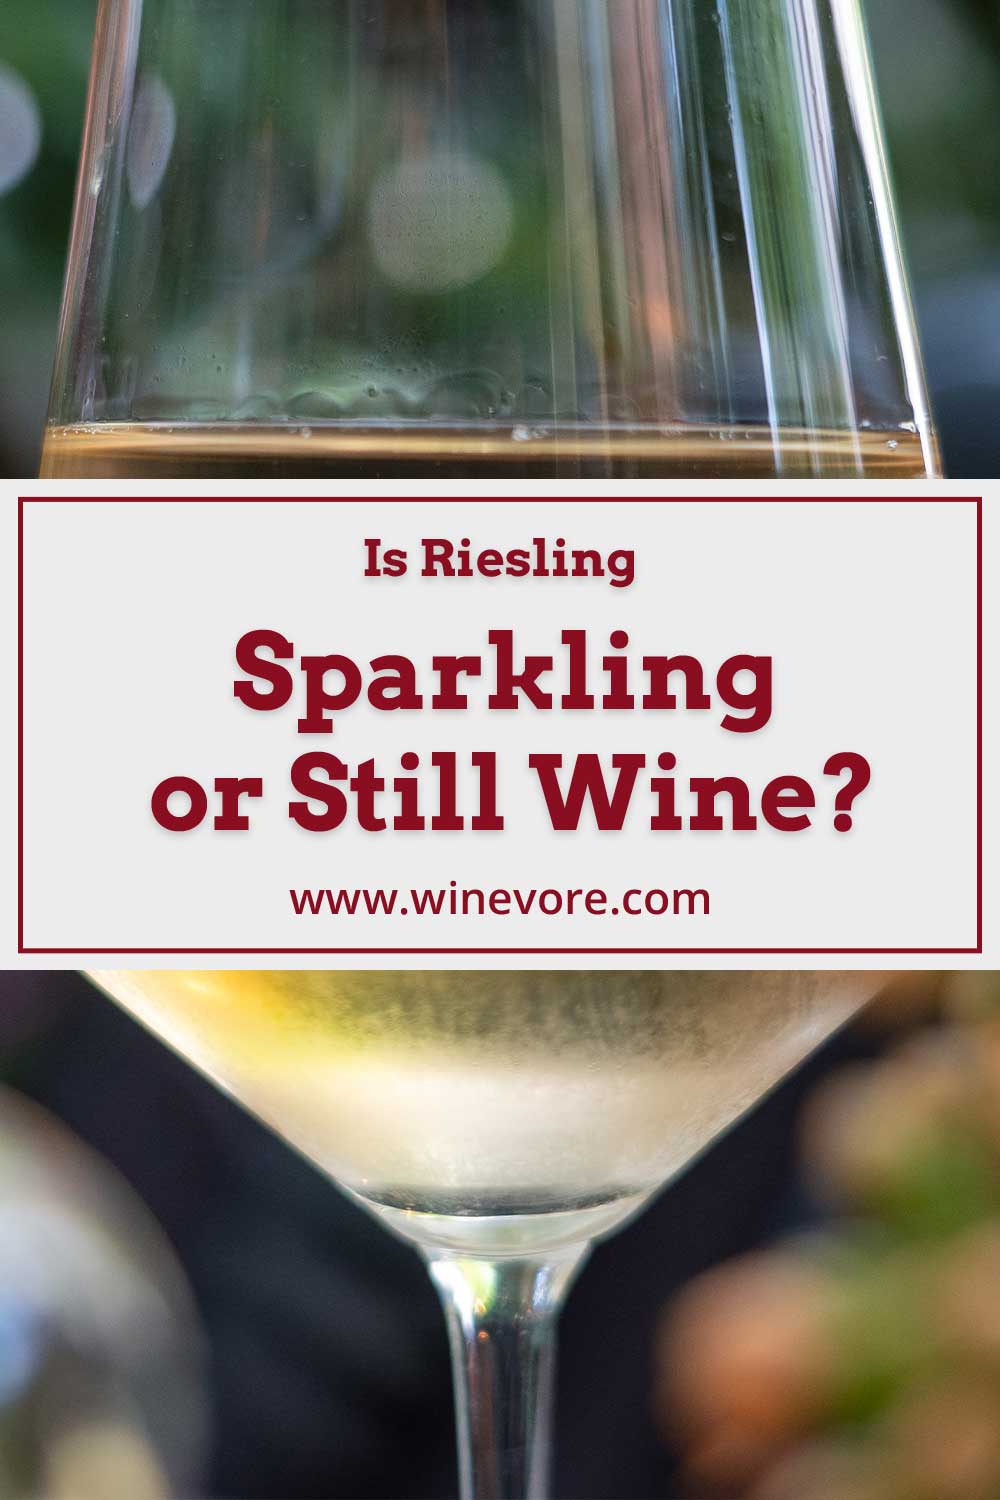 Close up of a wine glass - Is Riesling Sparkling or Still Wine?